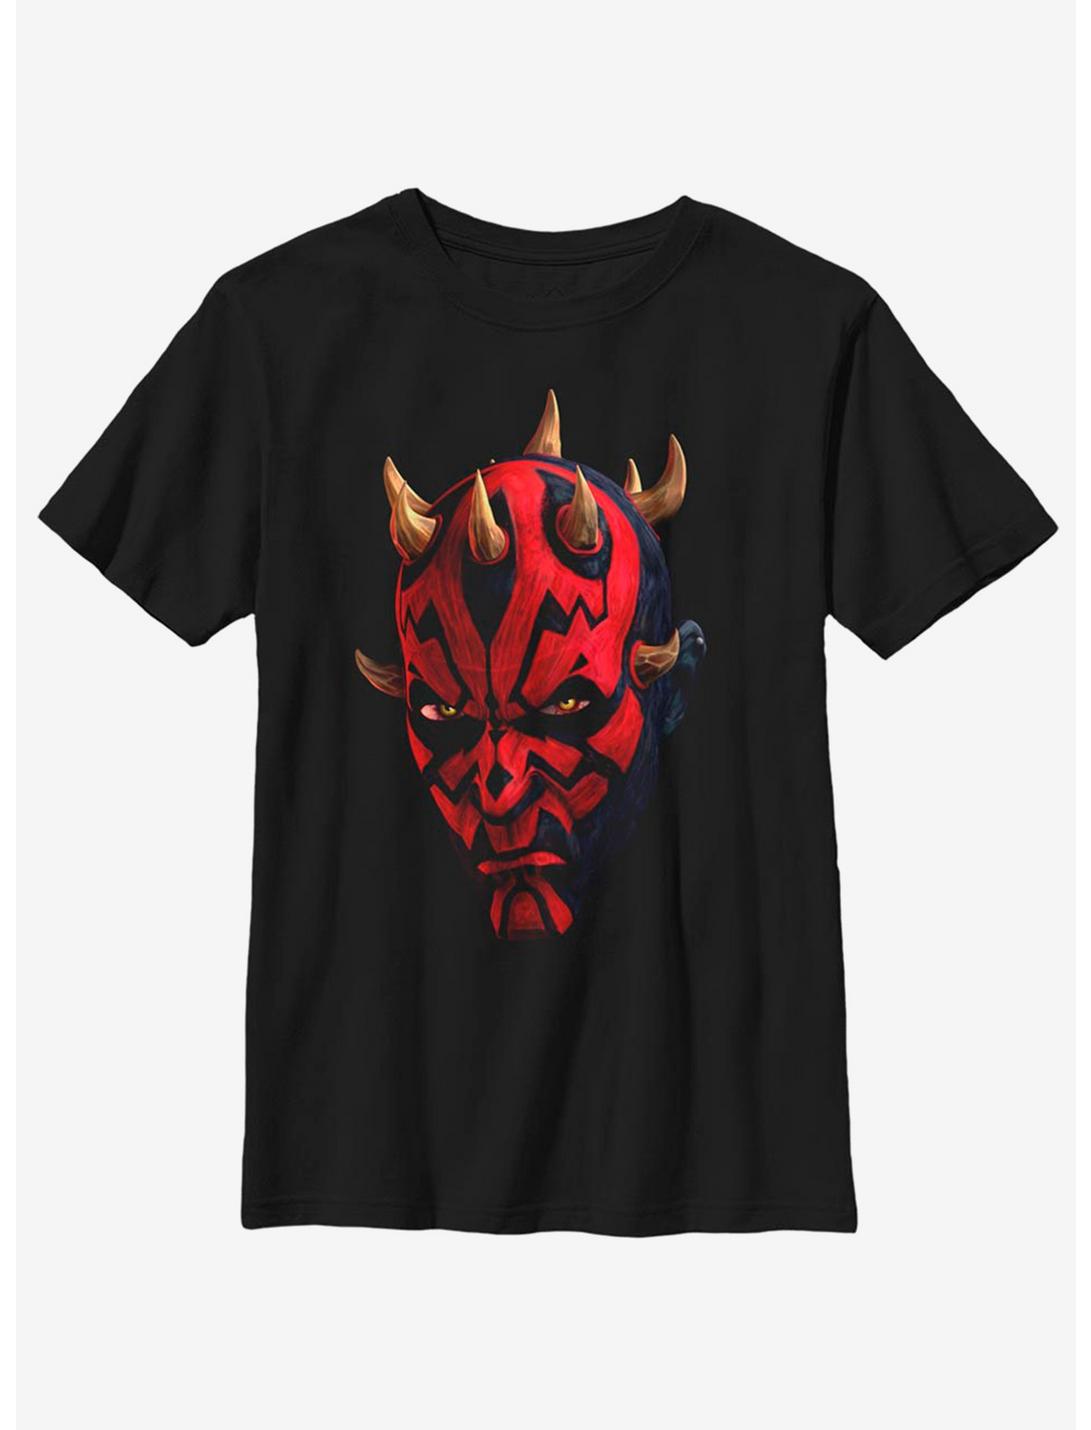 Plus Size Star Wars: The Clone Wars Maul Face Youth T-Shirt, BLACK, hi-res